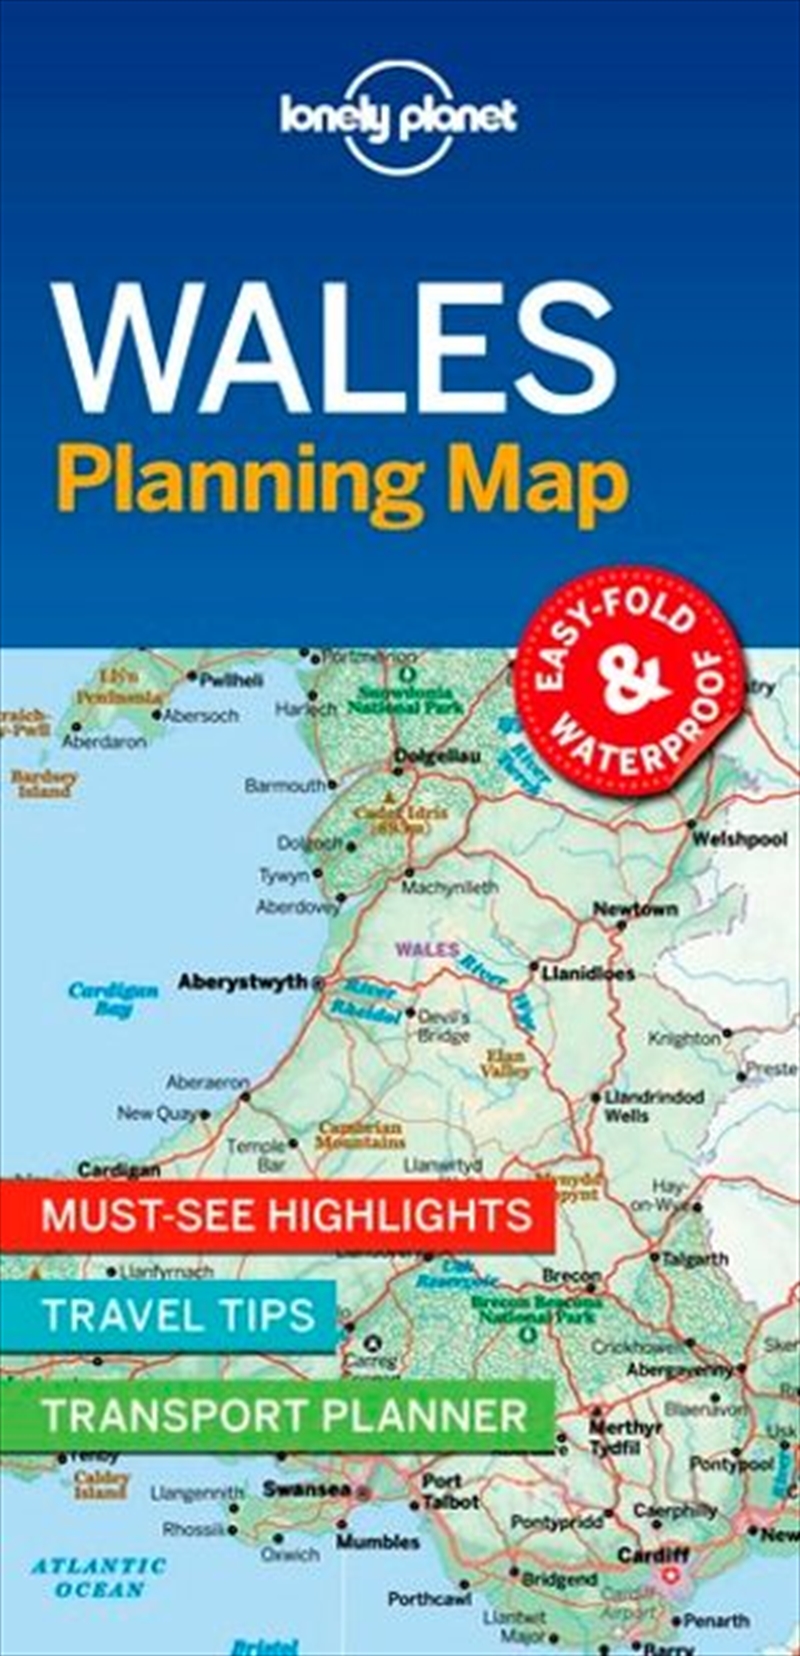 Lonely Planet Wales Planning Map/Product Detail/Travel & Holidays